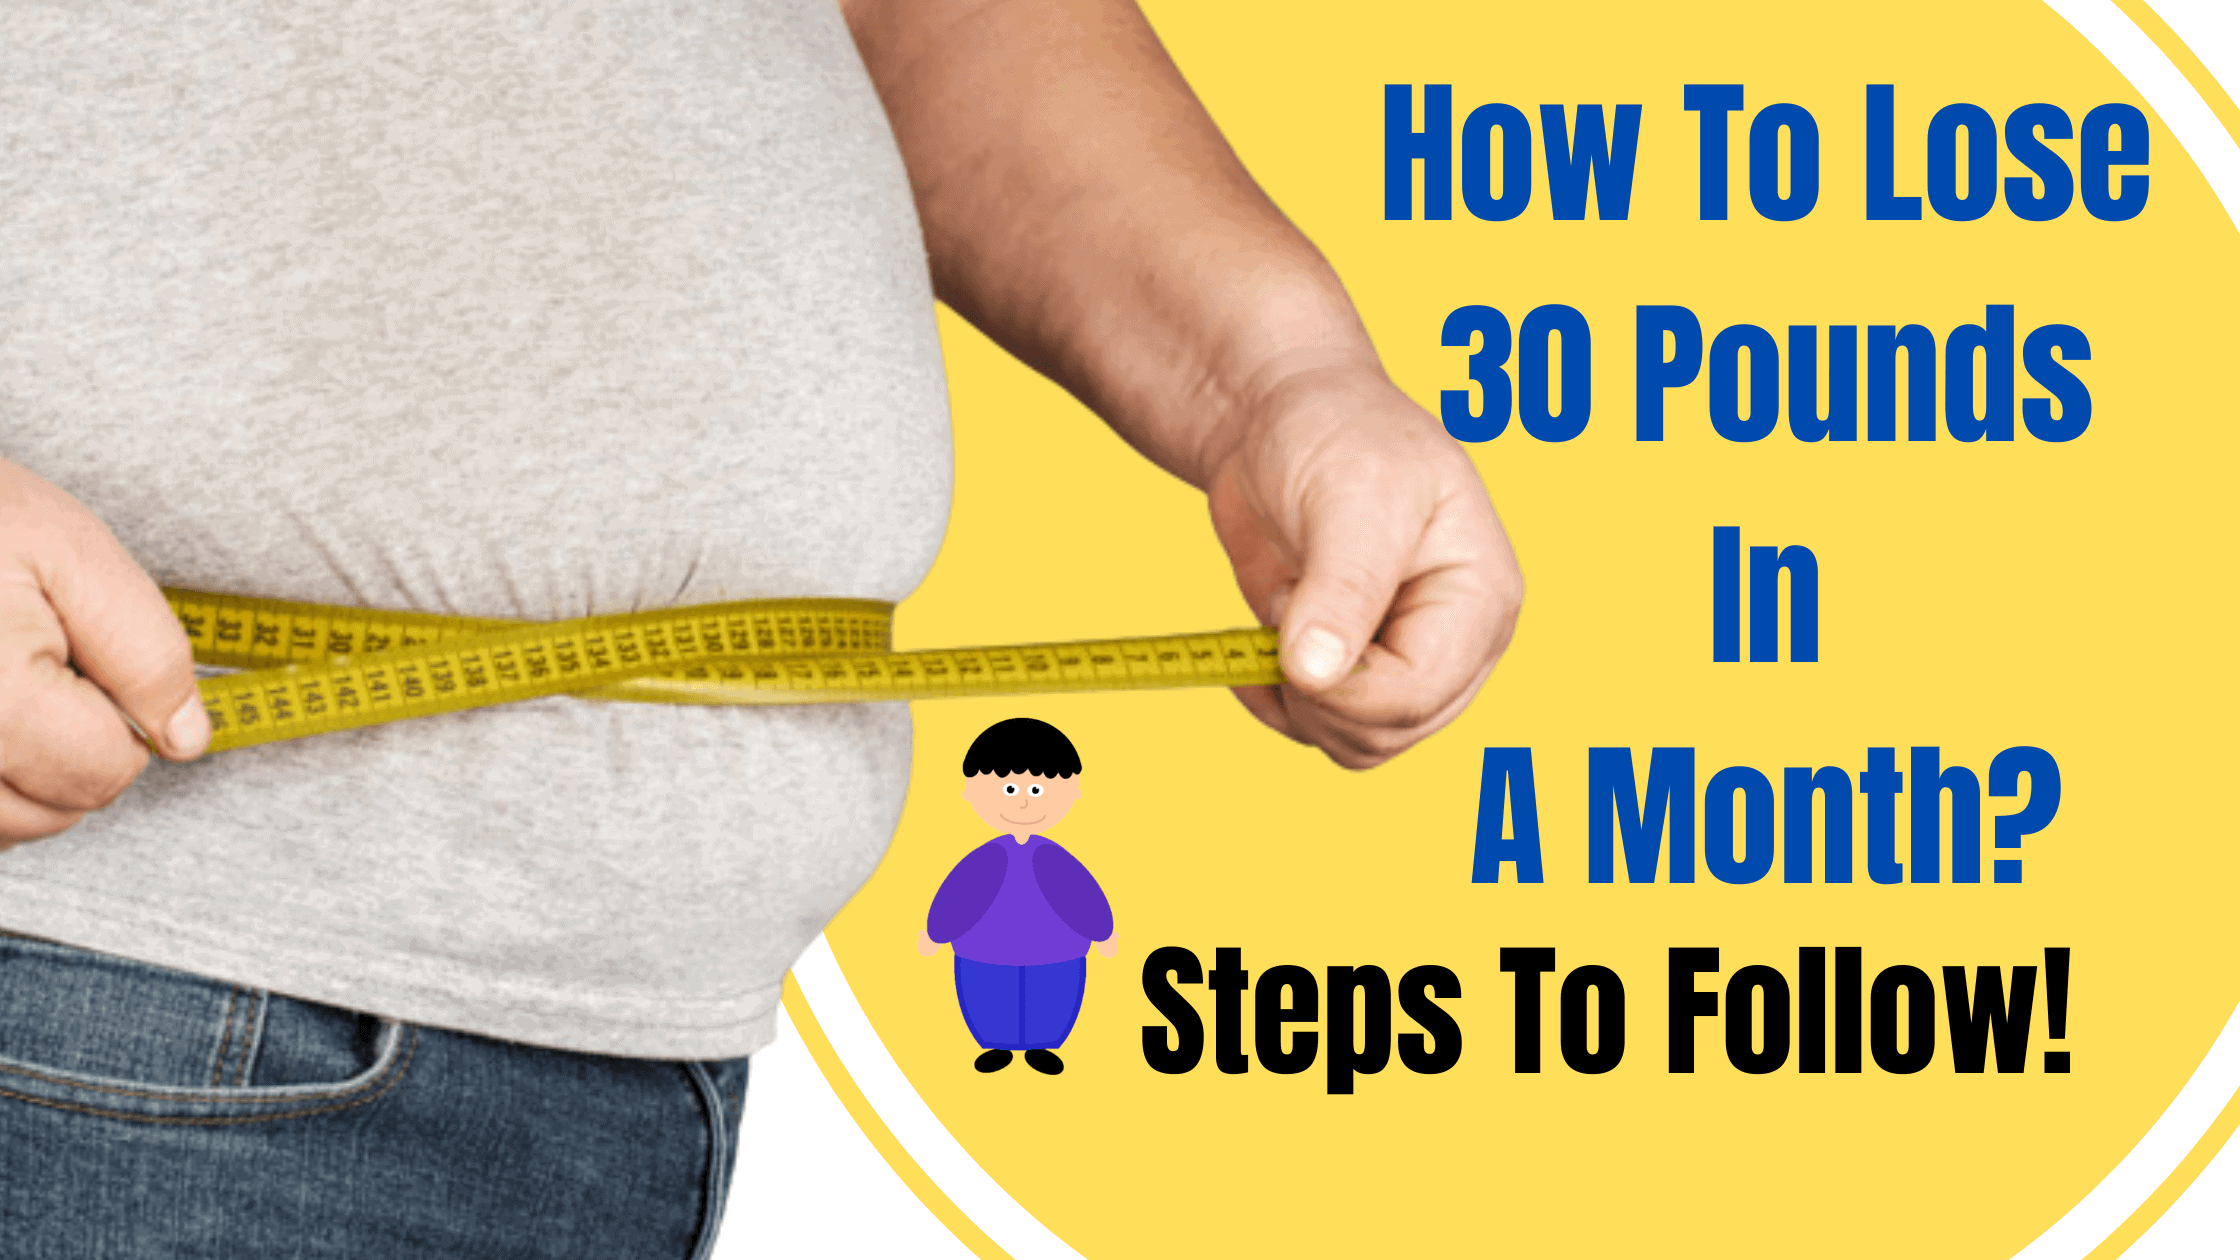 Lose 30 Pounds in a Month